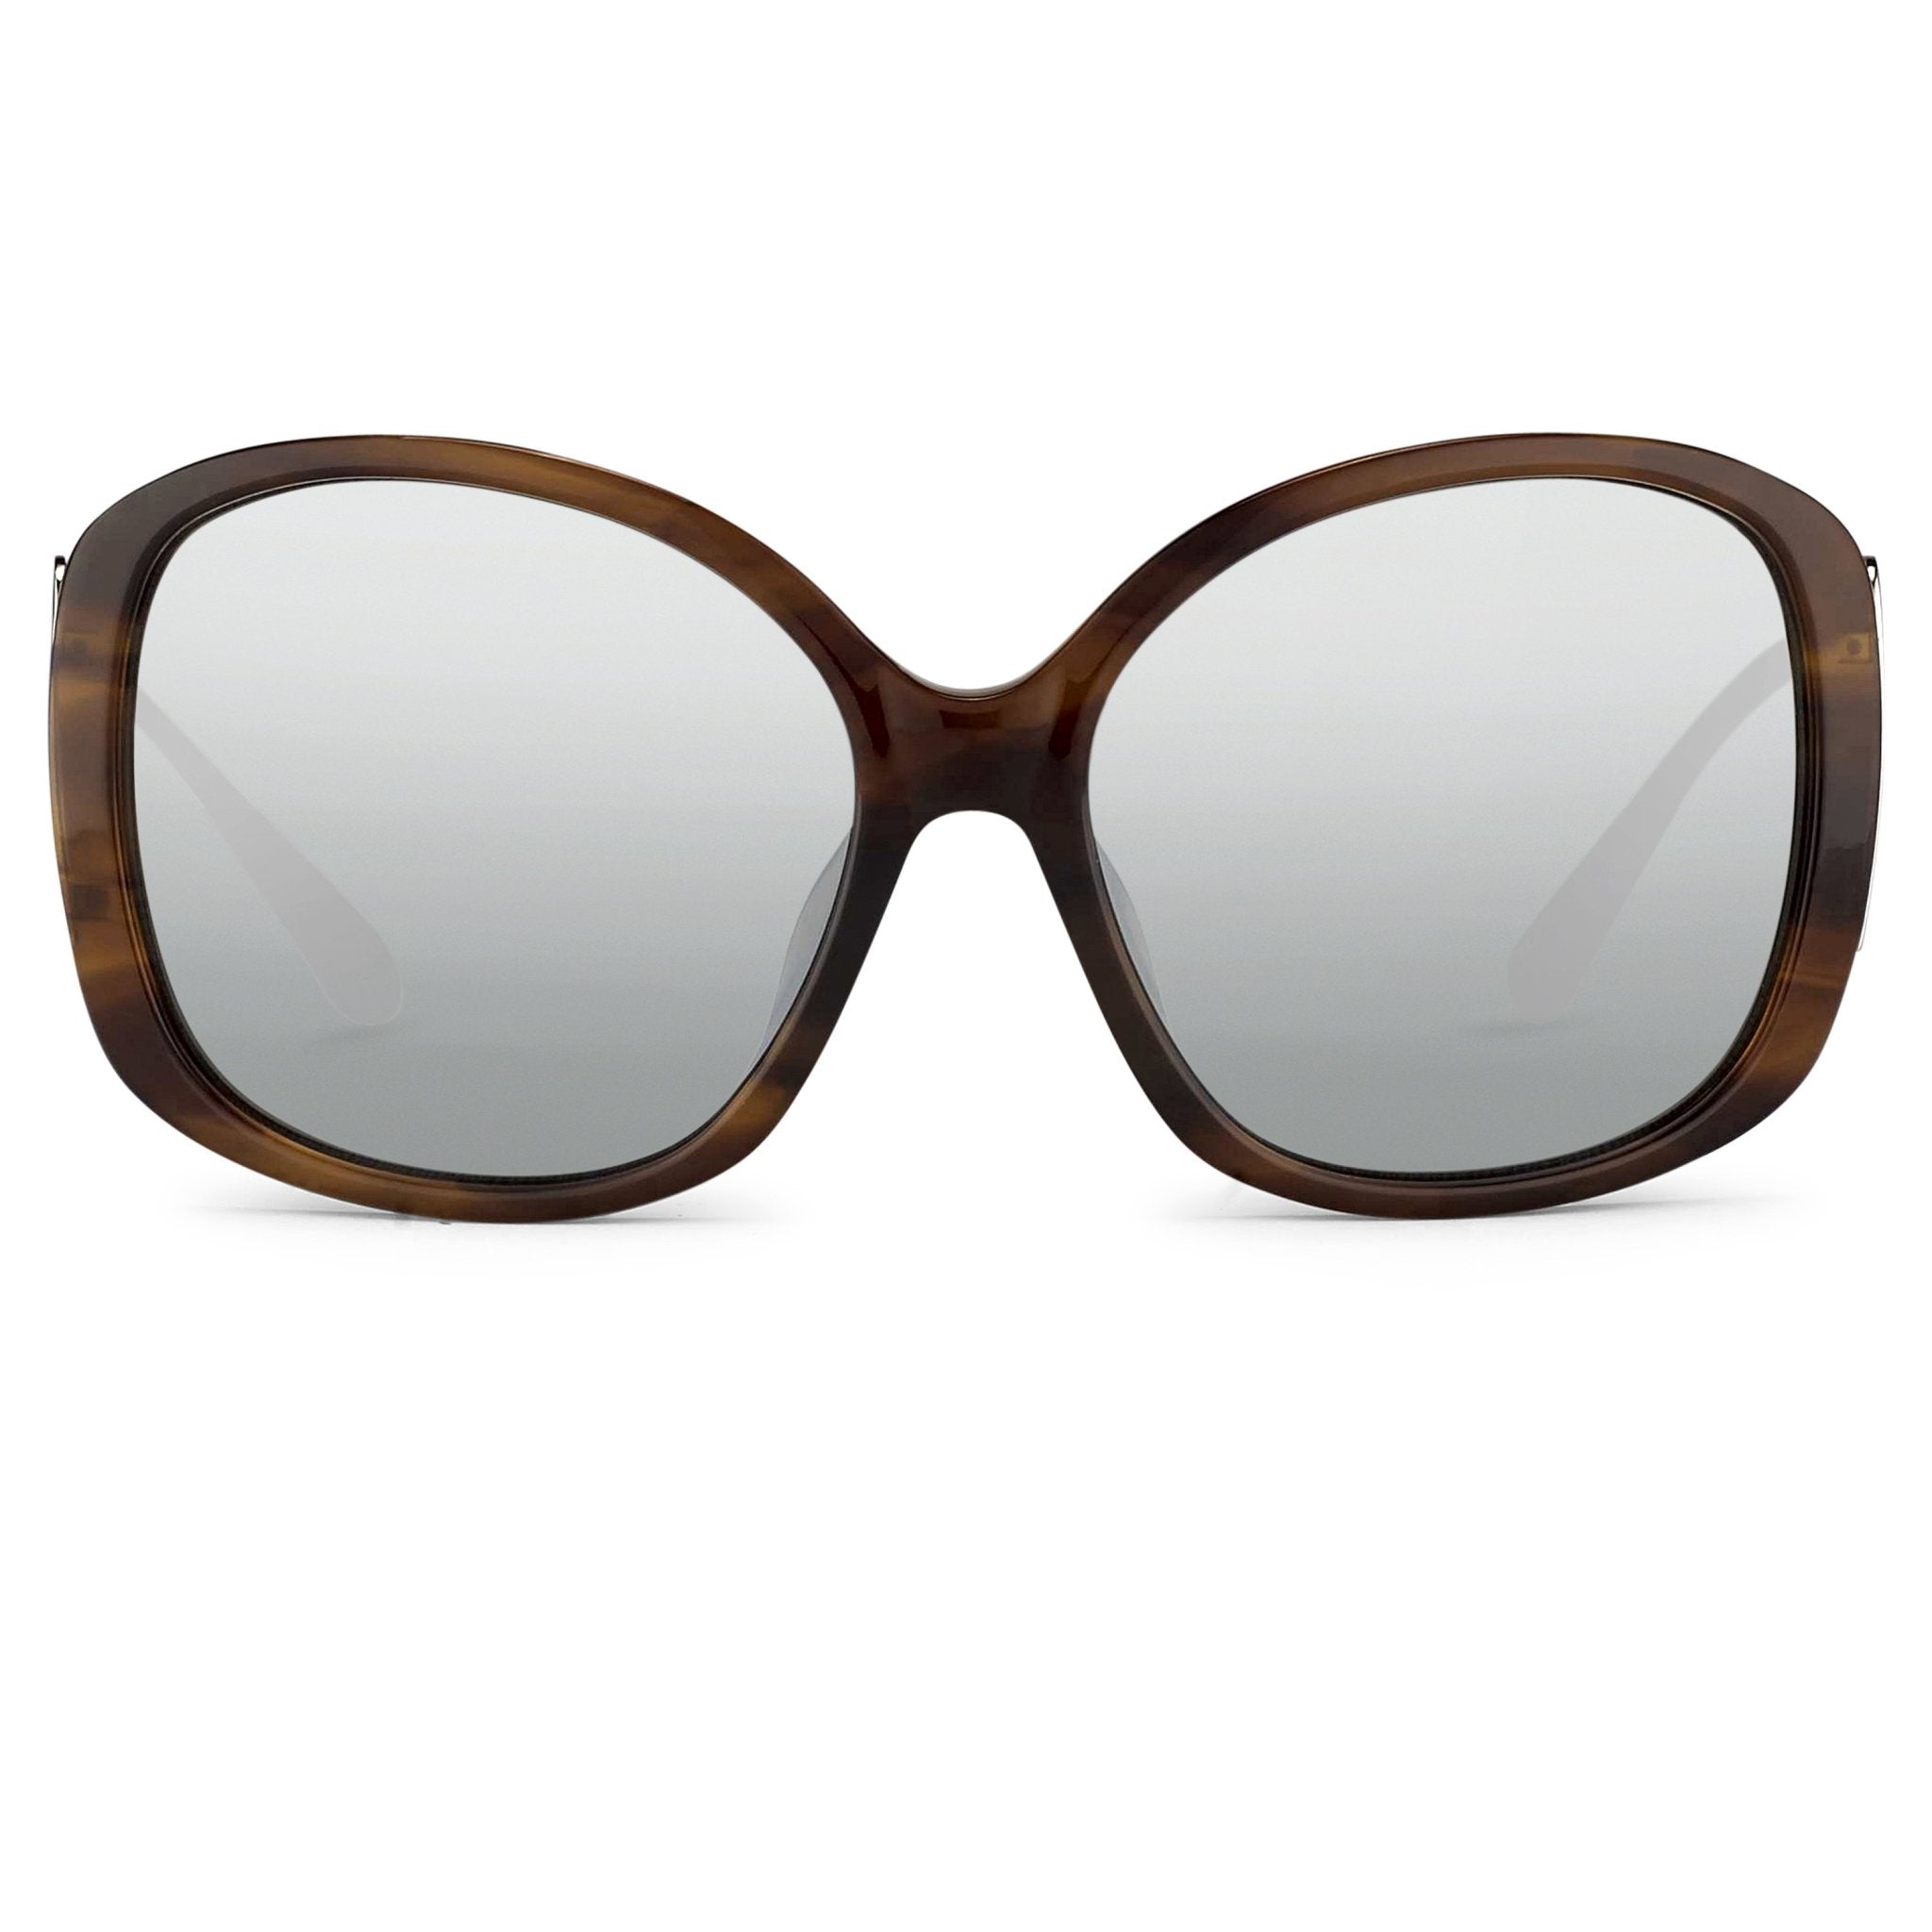 Prabal Gurung Sunglasses Oversized Female Amaretto Brown Frame Category 3 Silver Mirros Lenses PG23C3SUN - Watches & Crystals